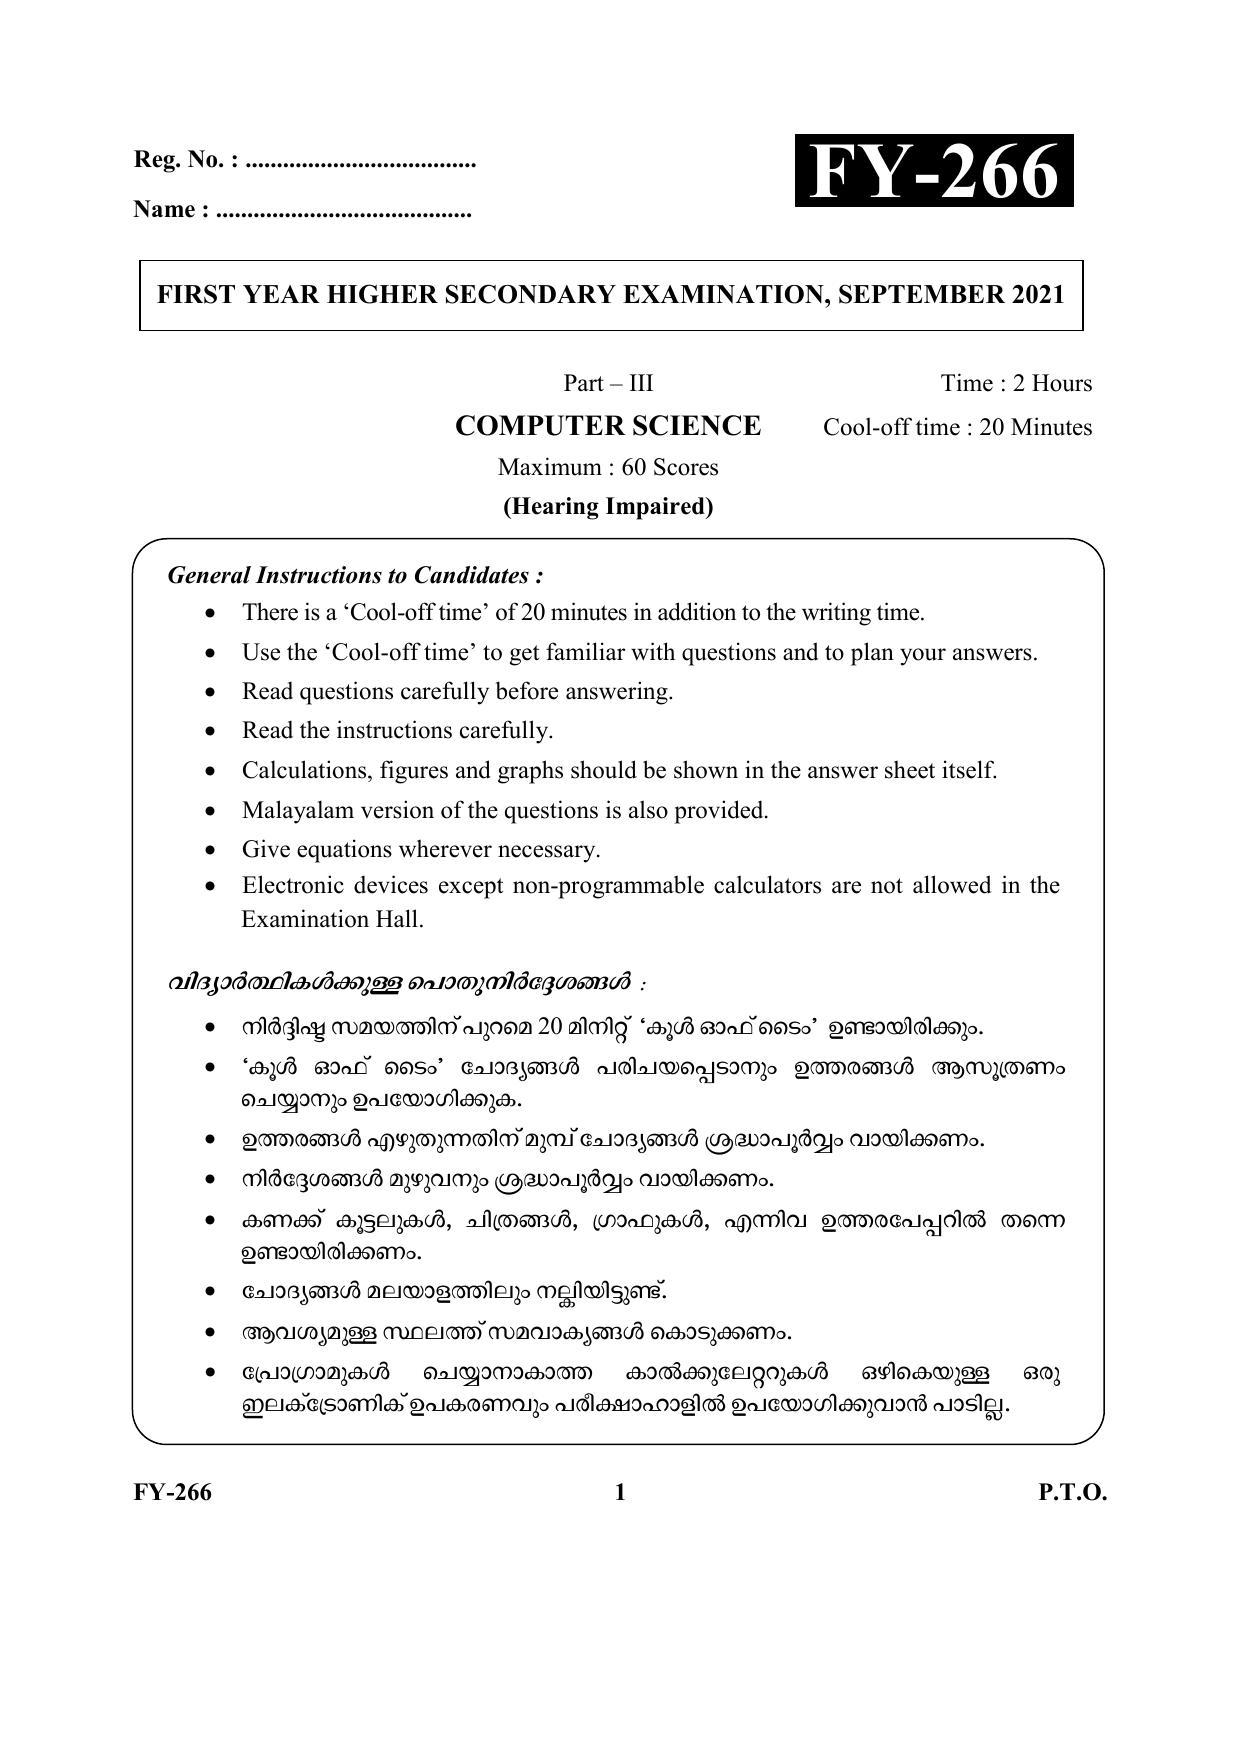 Kerala Plus One (Class 11th) Computer Science (Hearing Impaired) Question Paper 2021 - Page 1